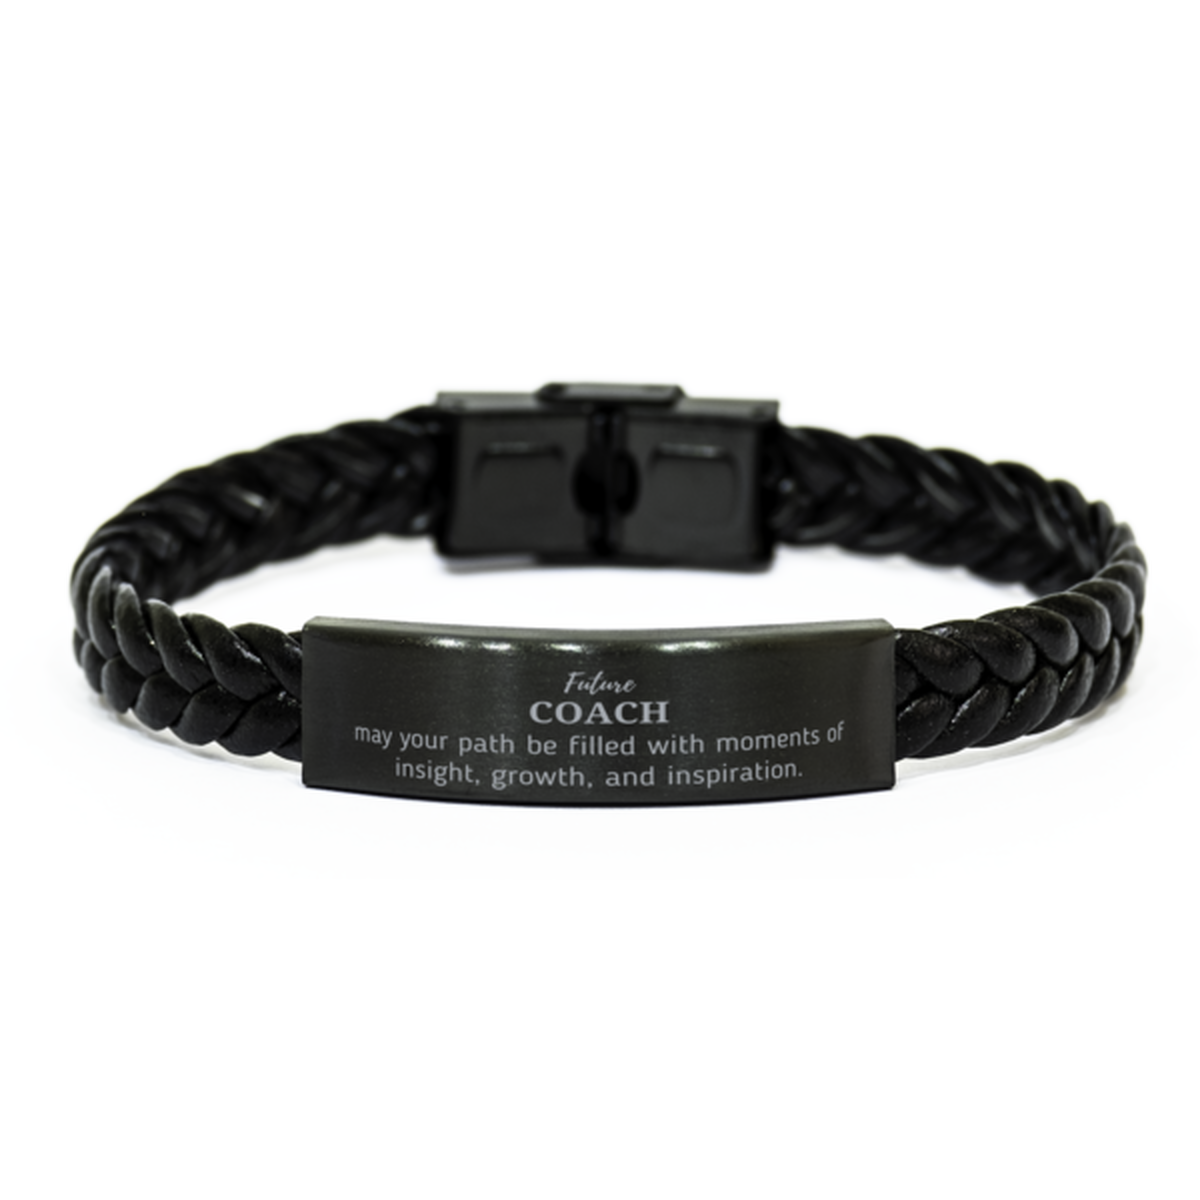 Future Coach Gifts, May your path be filled with moments of insight, Graduation Gifts for New Coach, Christmas Unique Braided Leather Bracelet For Men, Women, Friends